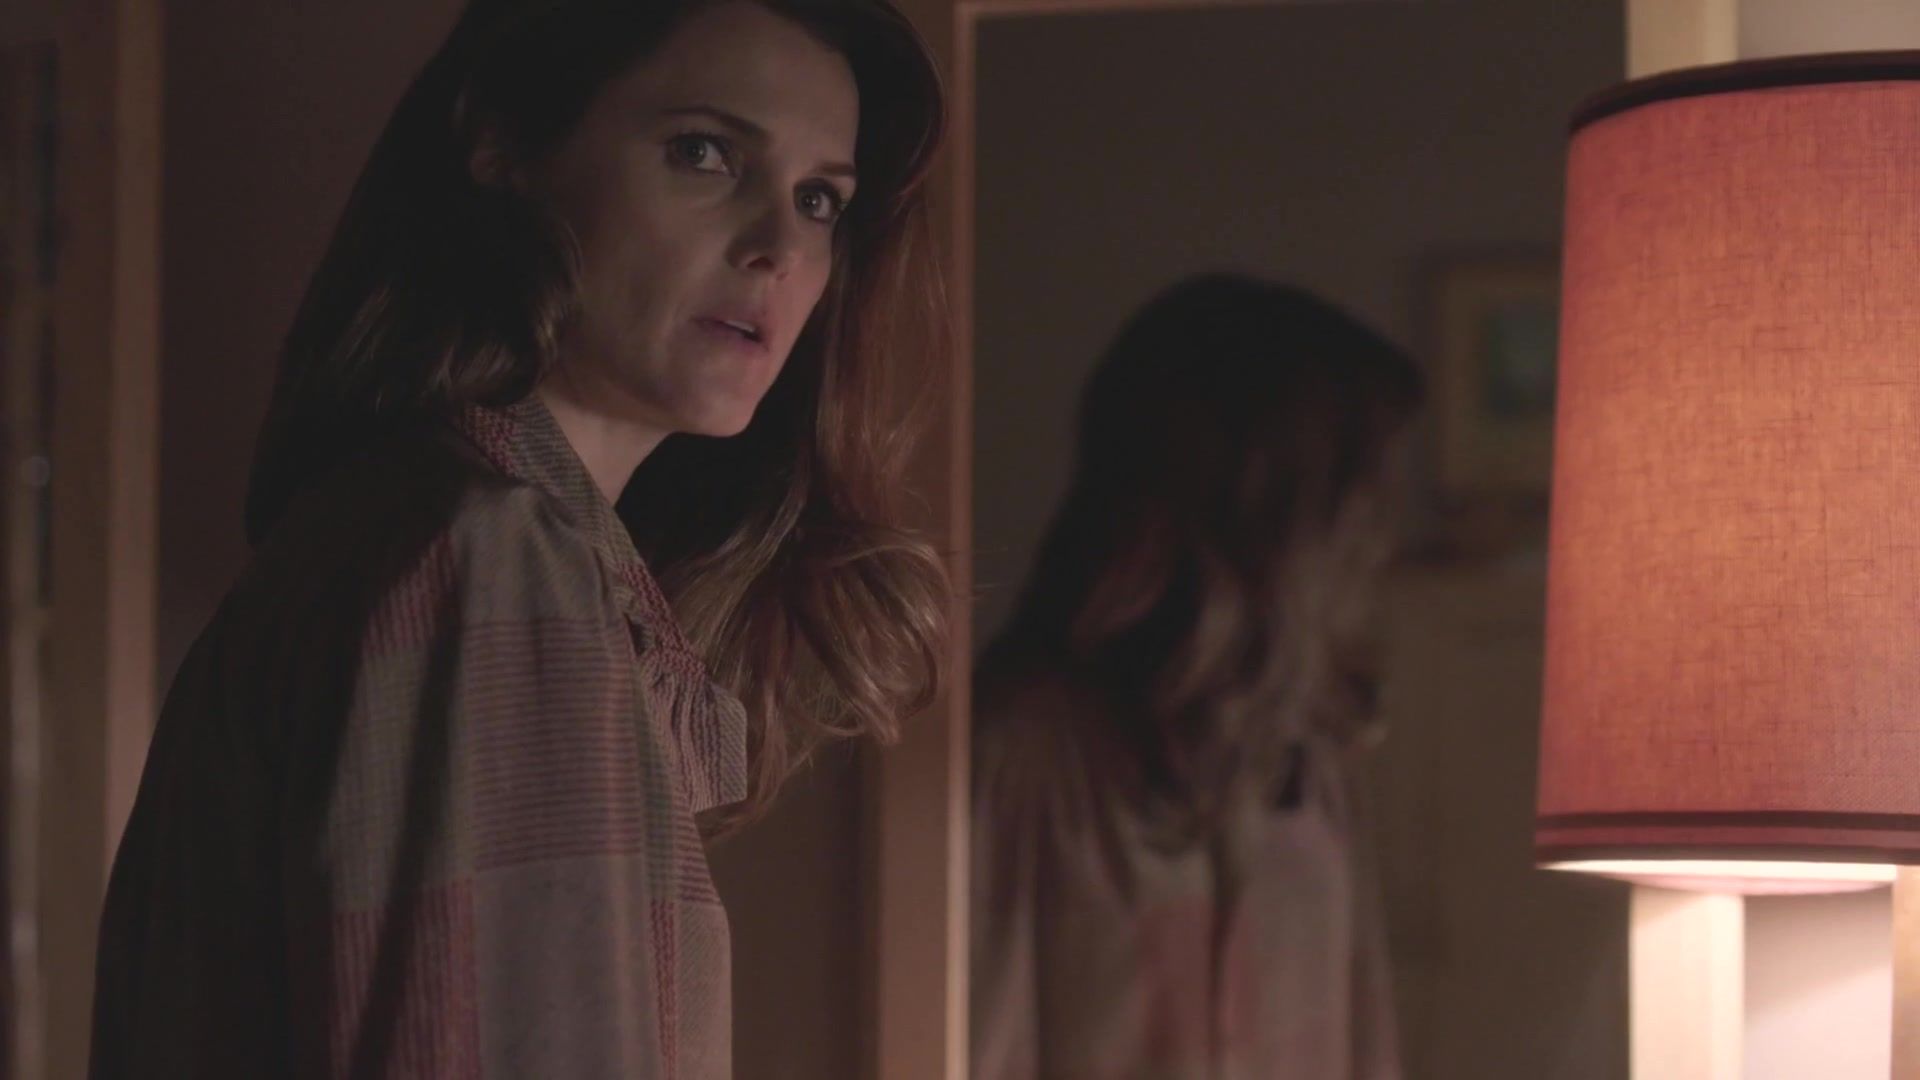 Big Boobs Keri Russell nude - The Americans S04E05 (2016) Spank - 1